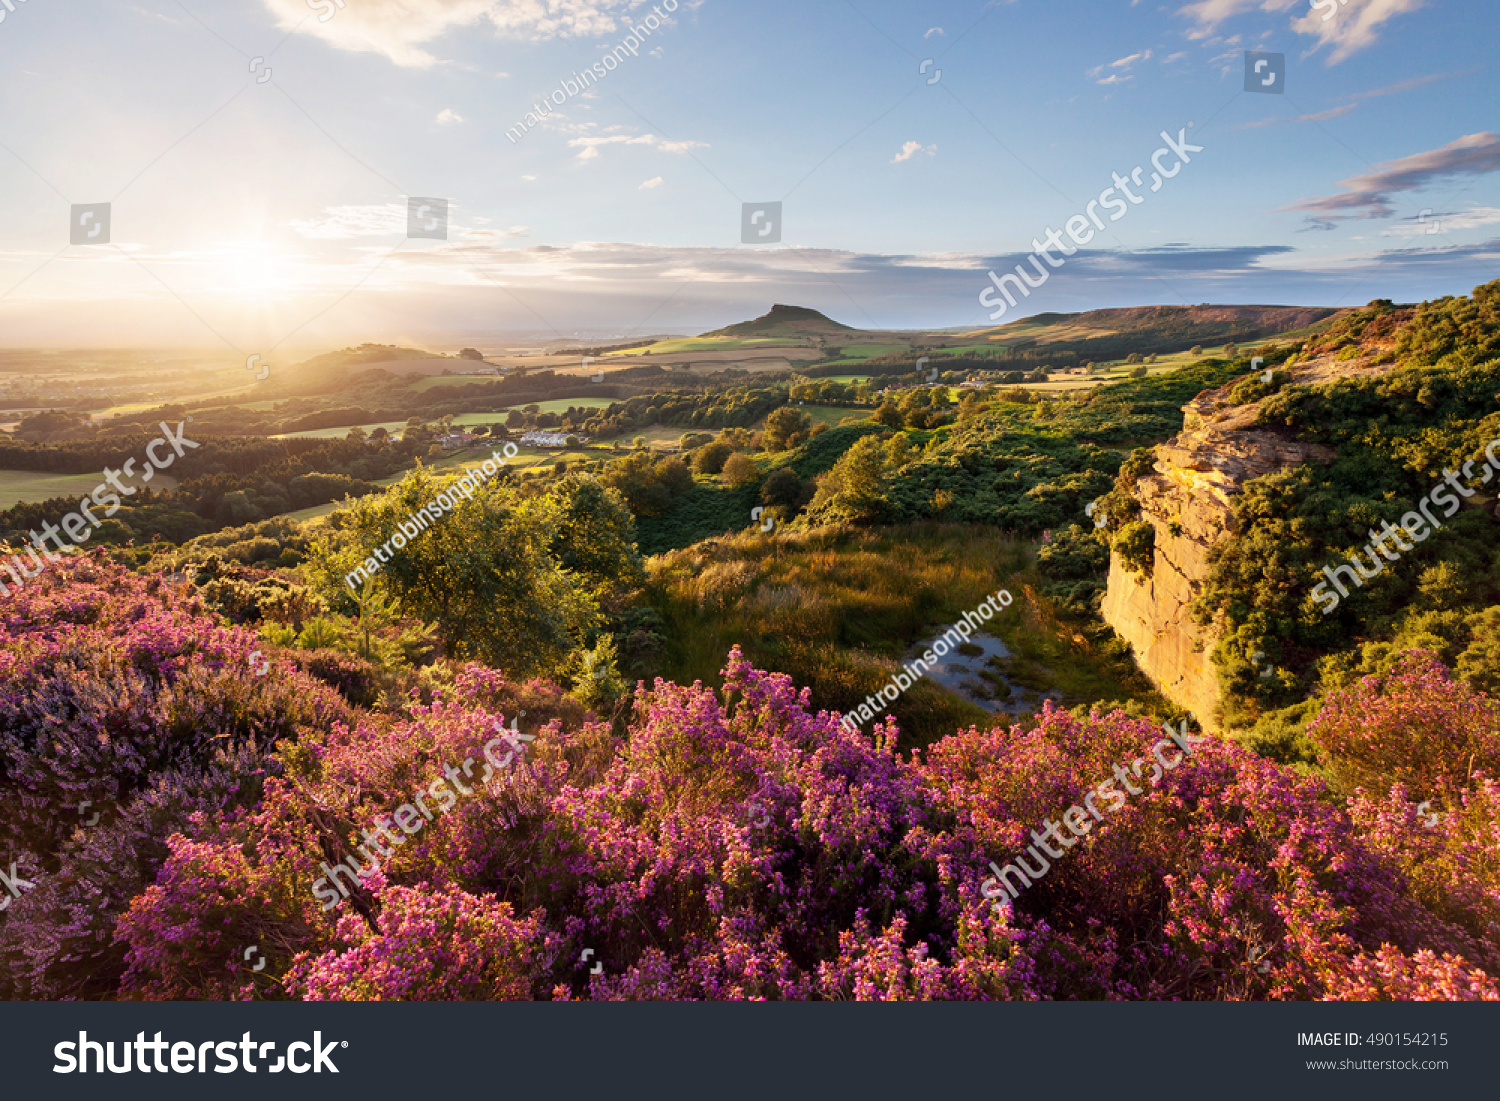 Sunset behind Roseberry Topping, taken from Cockshaw Hill in the North York Moors National Park. #490154215